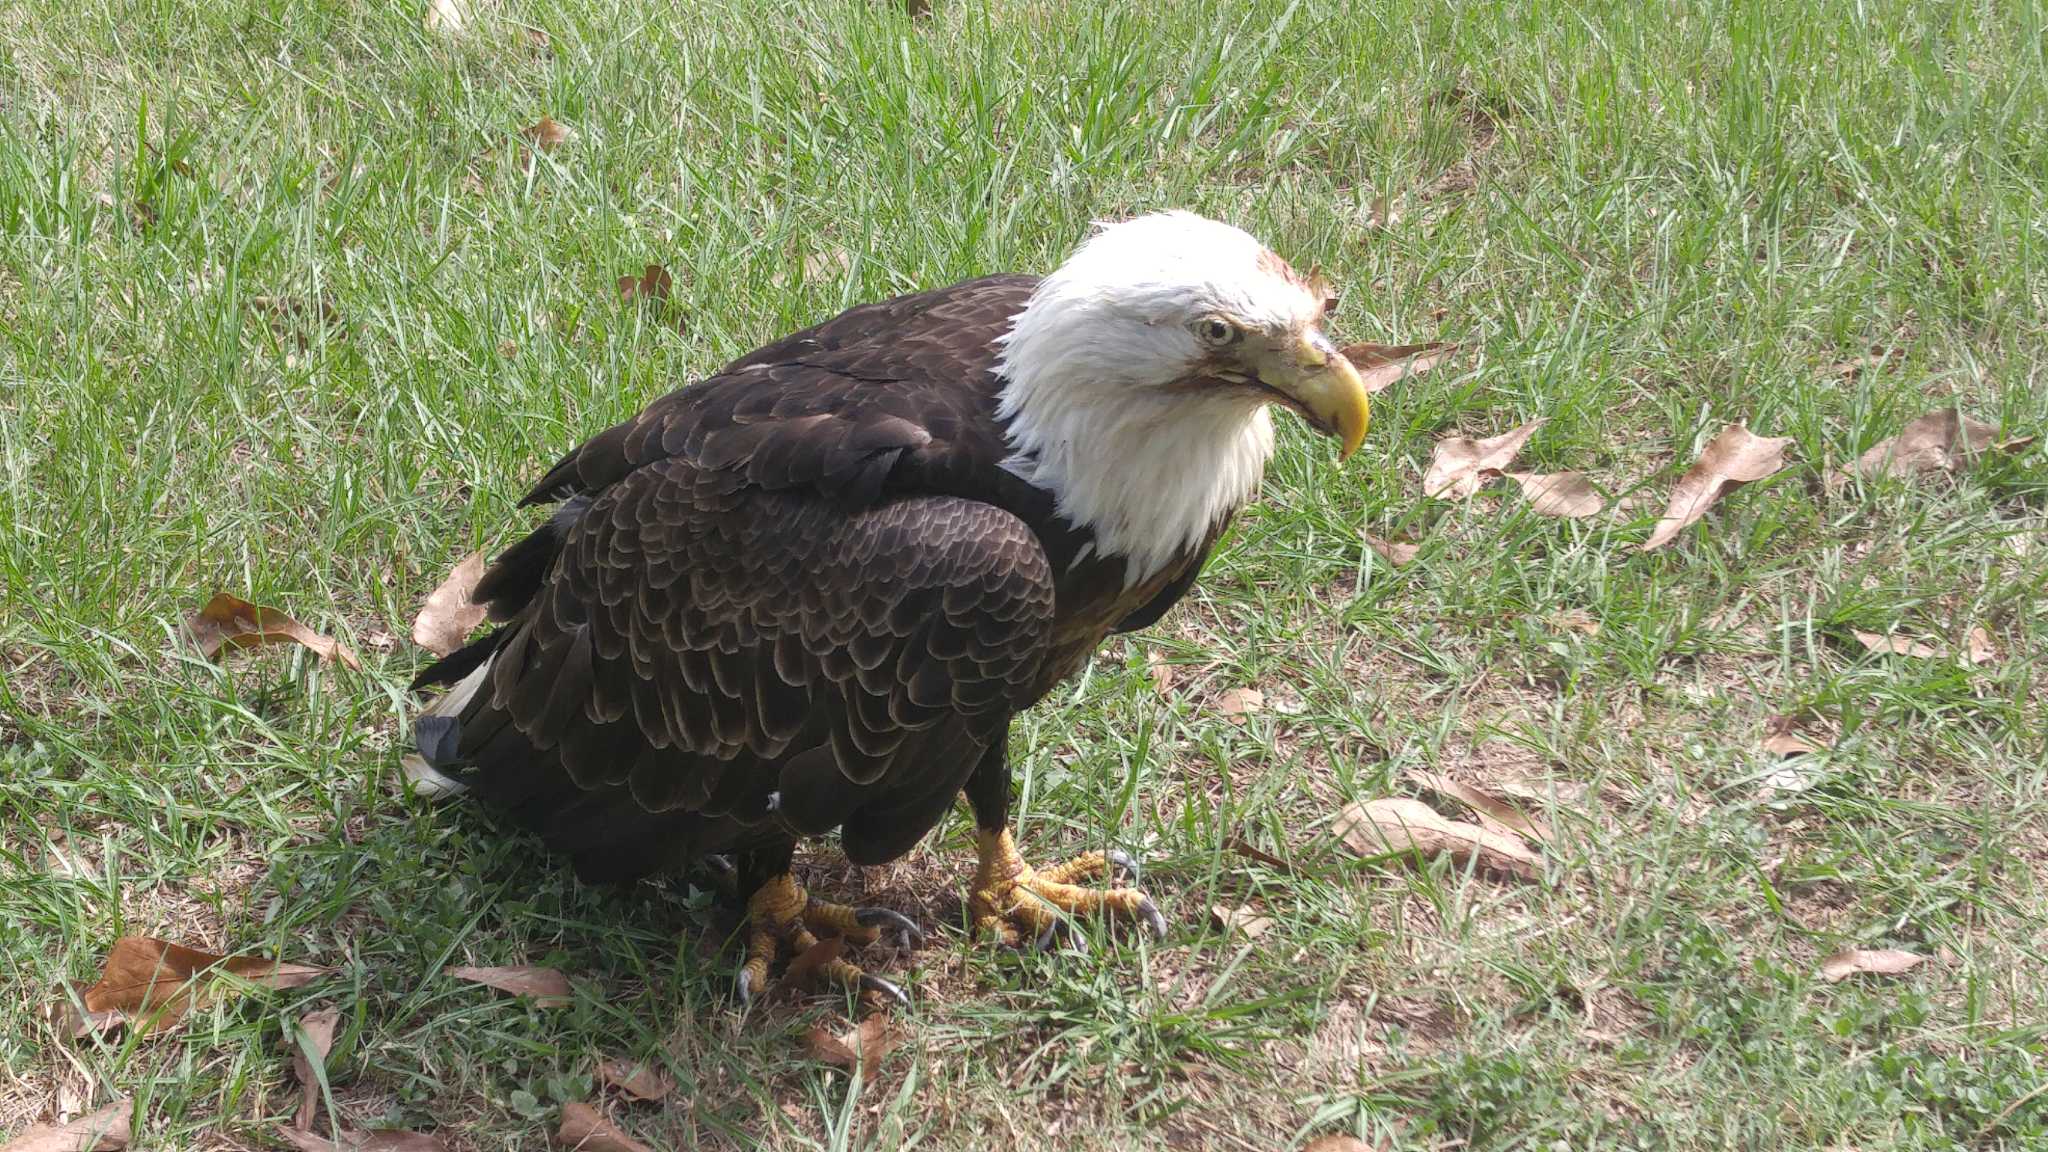 Injured bald eagle in The Woodlands euthanized - The Courier